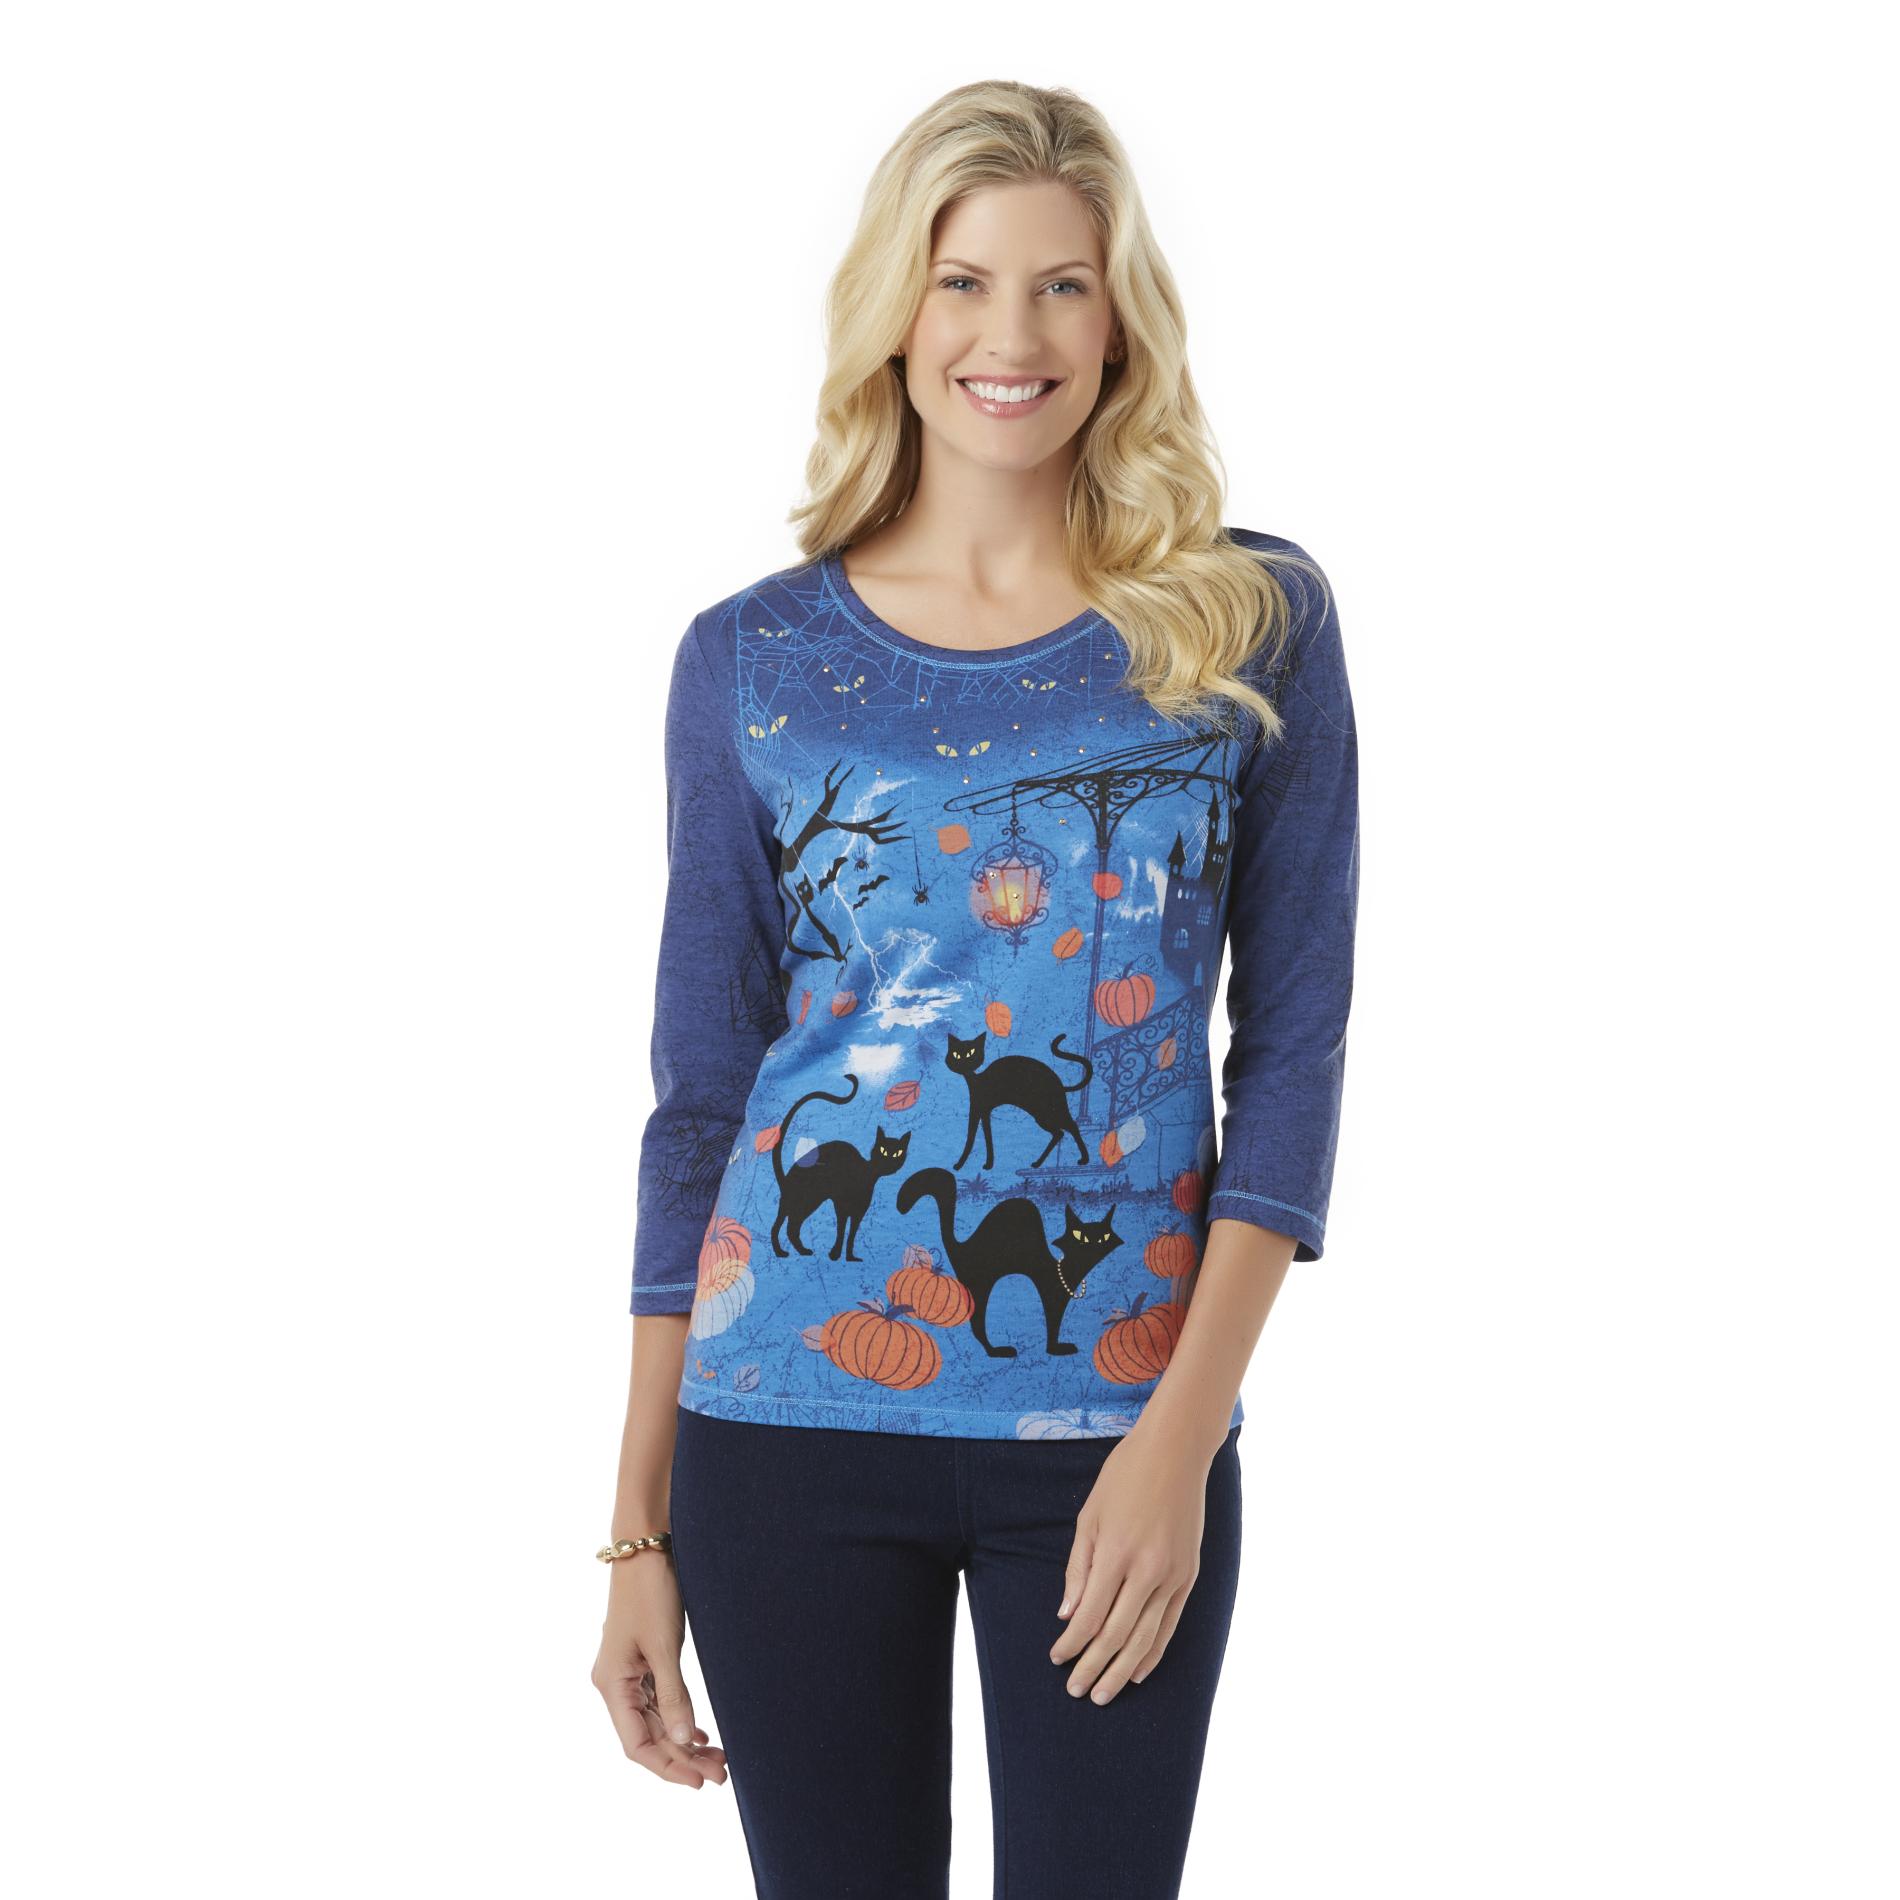 Holiday Editions Women's Halloween Graphic T-Shirt - Cats